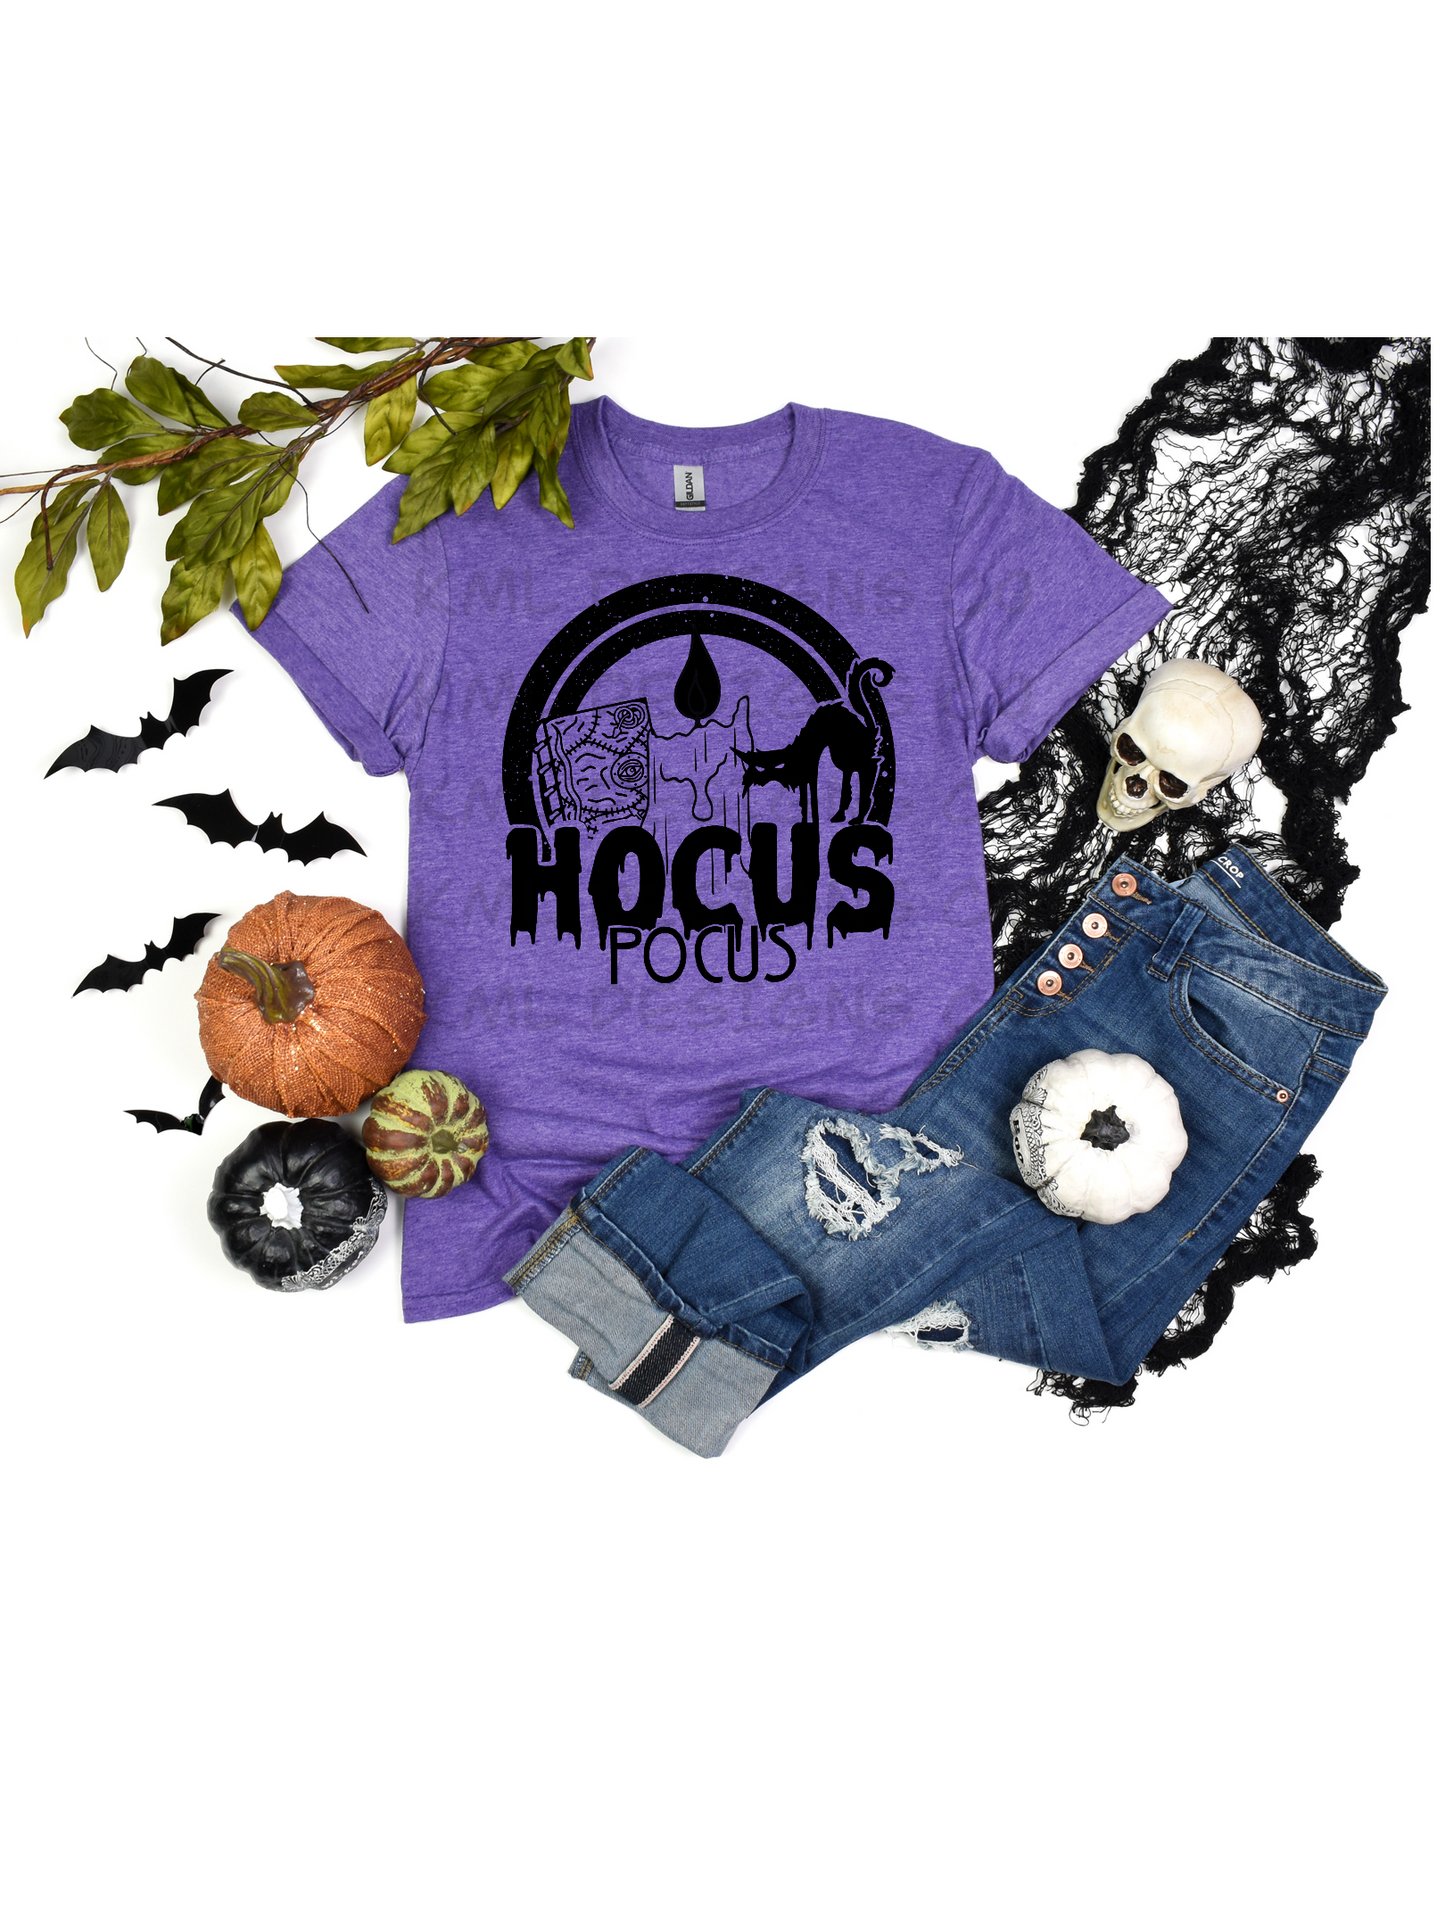 The witches book tee